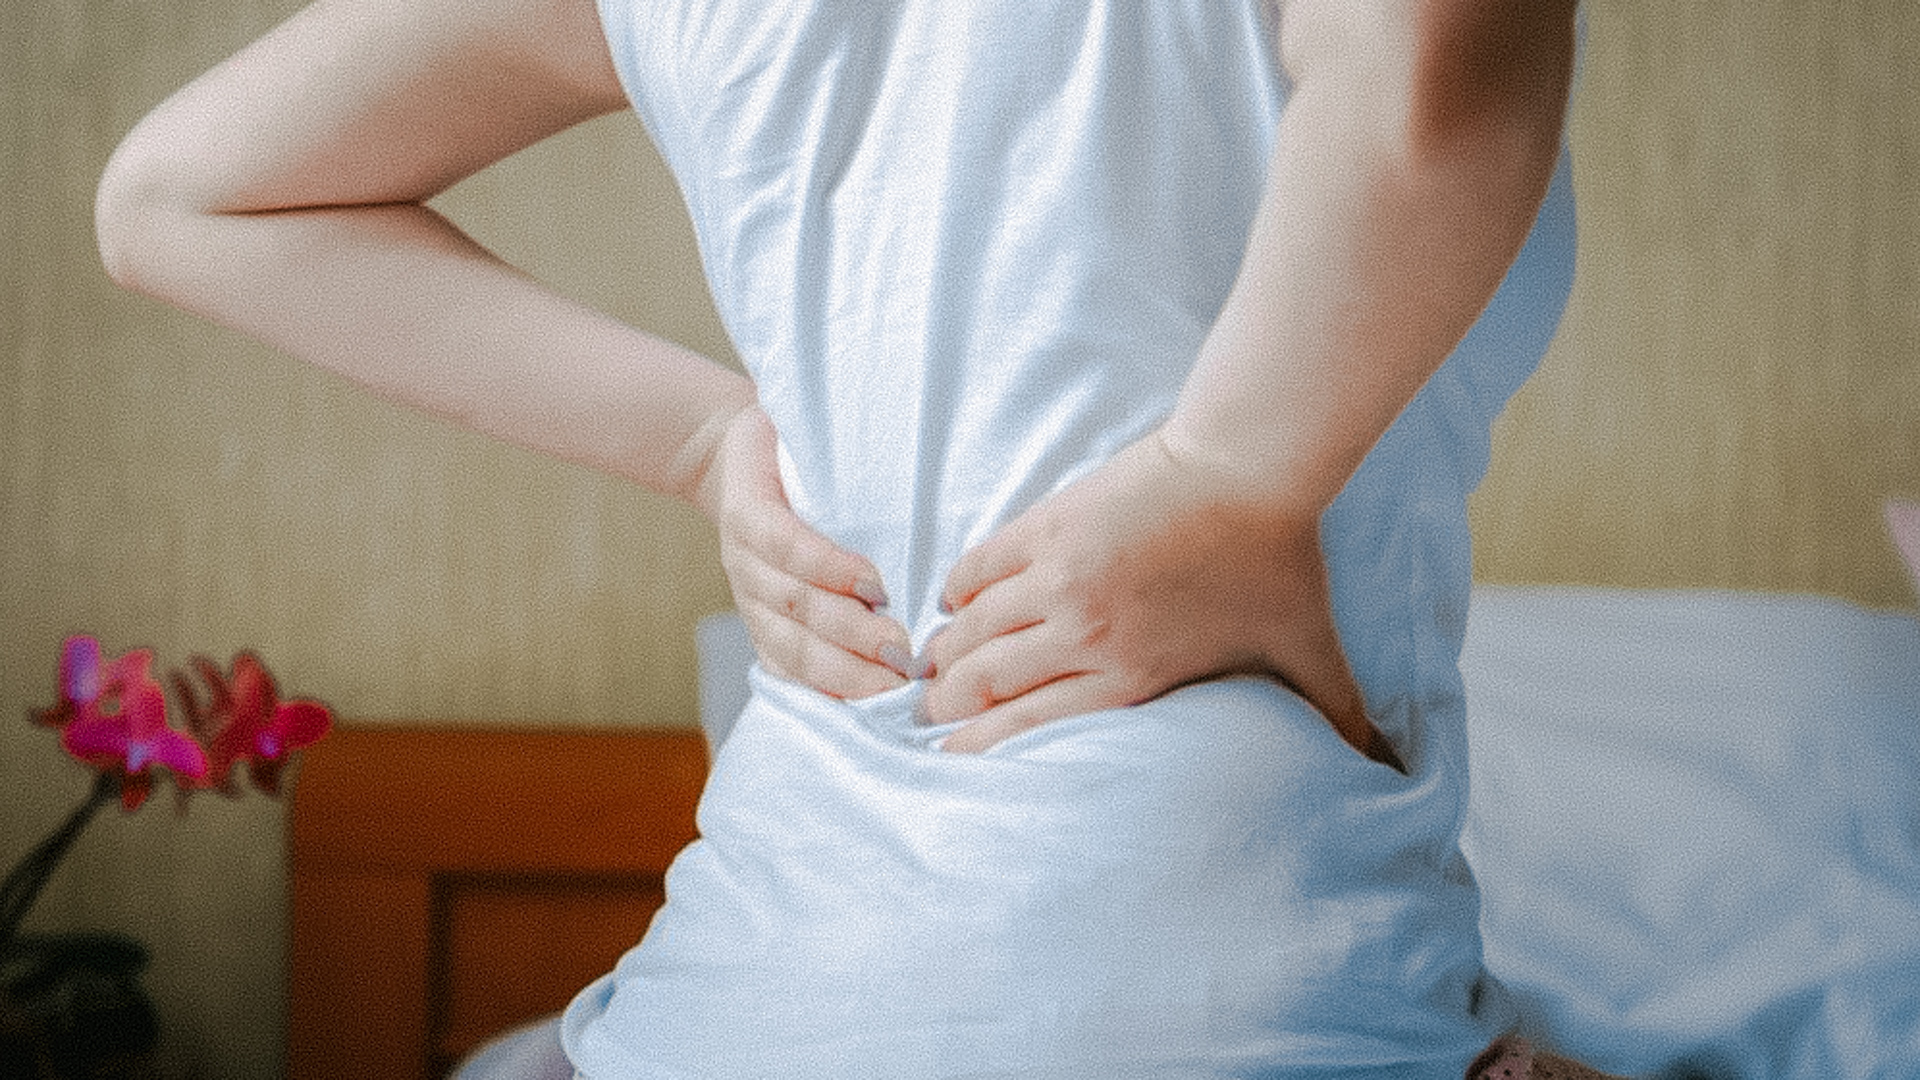 https://ptsolutions.com/wp-content/uploads/2021/11/how-to-relieve-hip-pain-while-sleeping-1170x560-1920x1080px.jpg